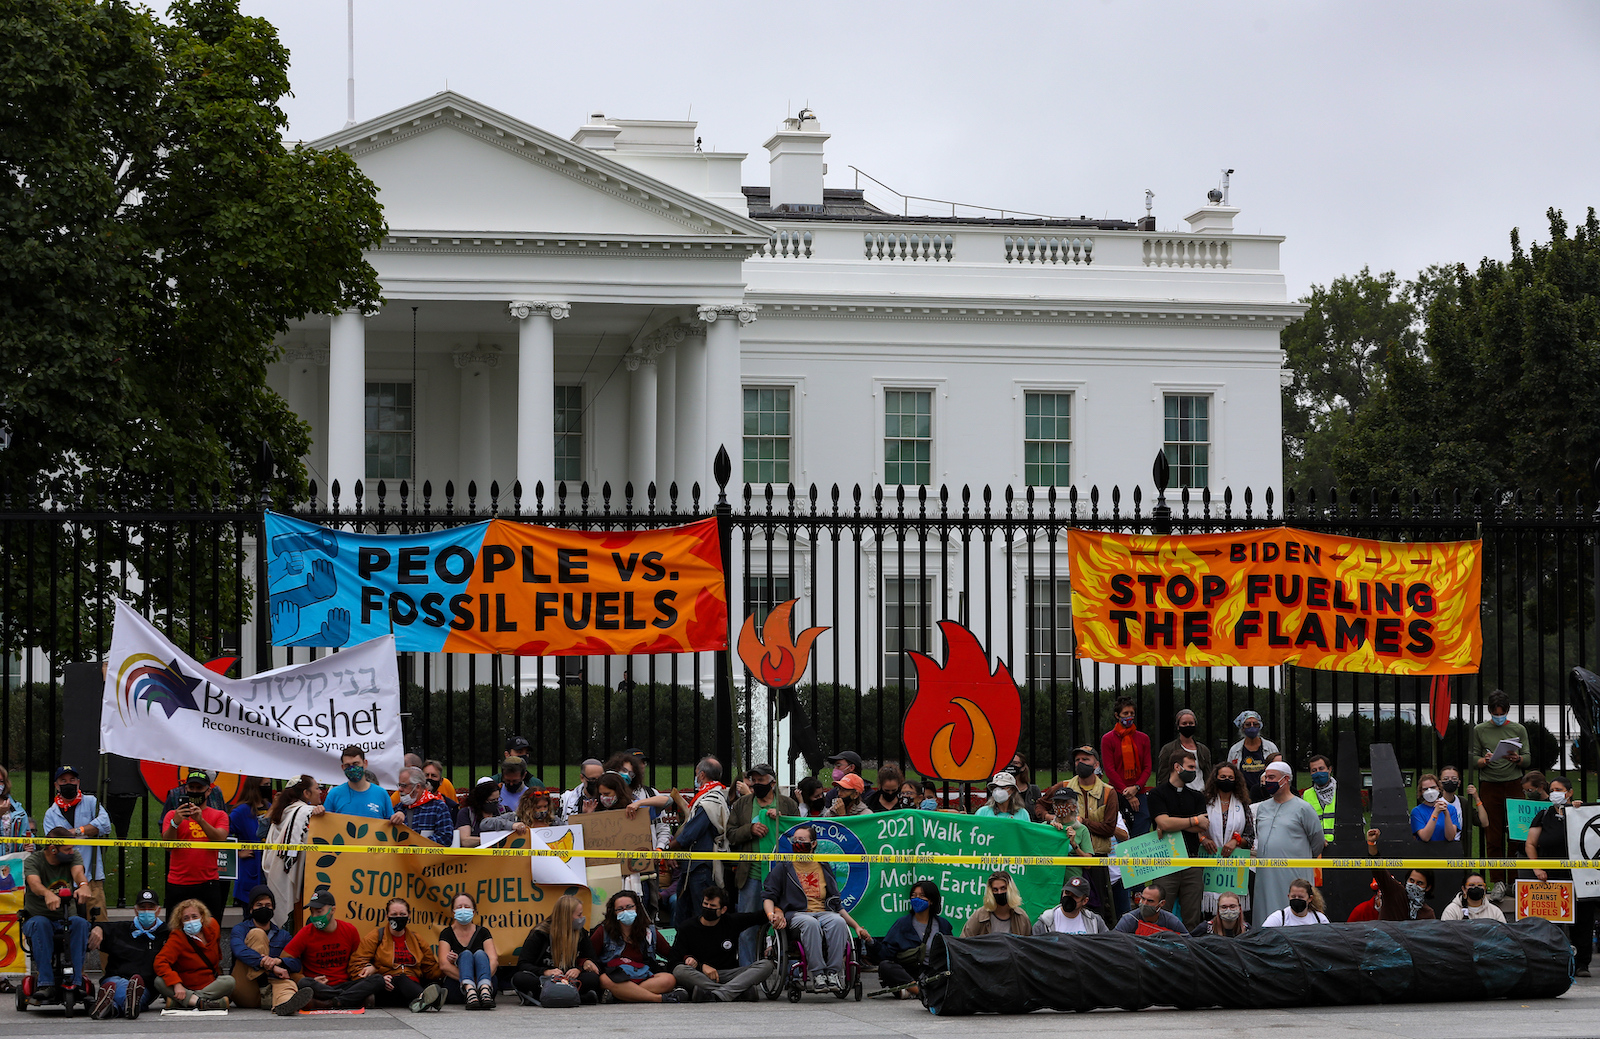 Protesters in front of white house with signs and banners